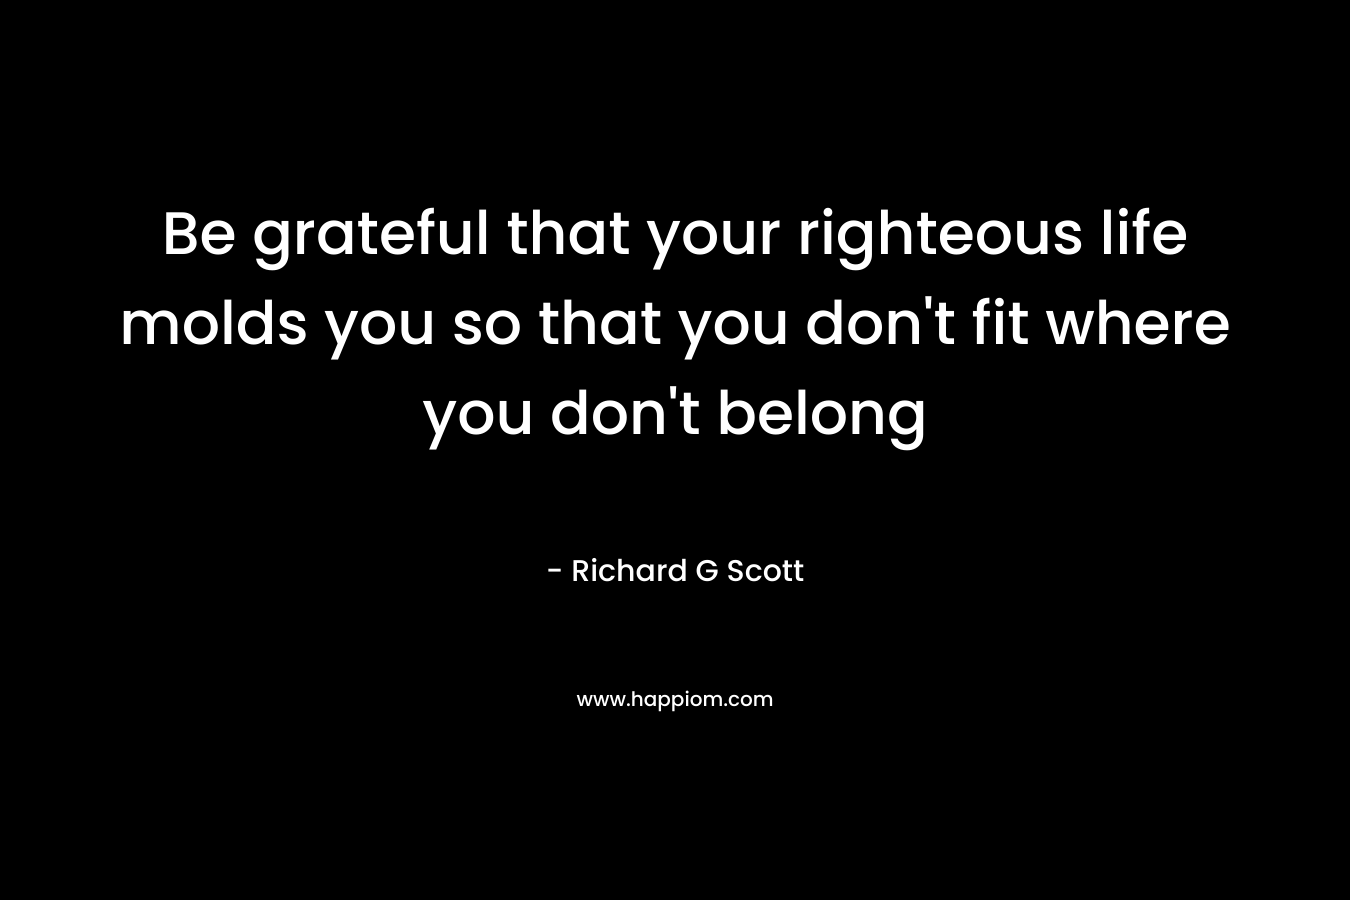 Be grateful that your righteous life molds you so that you don't fit where you don't belong